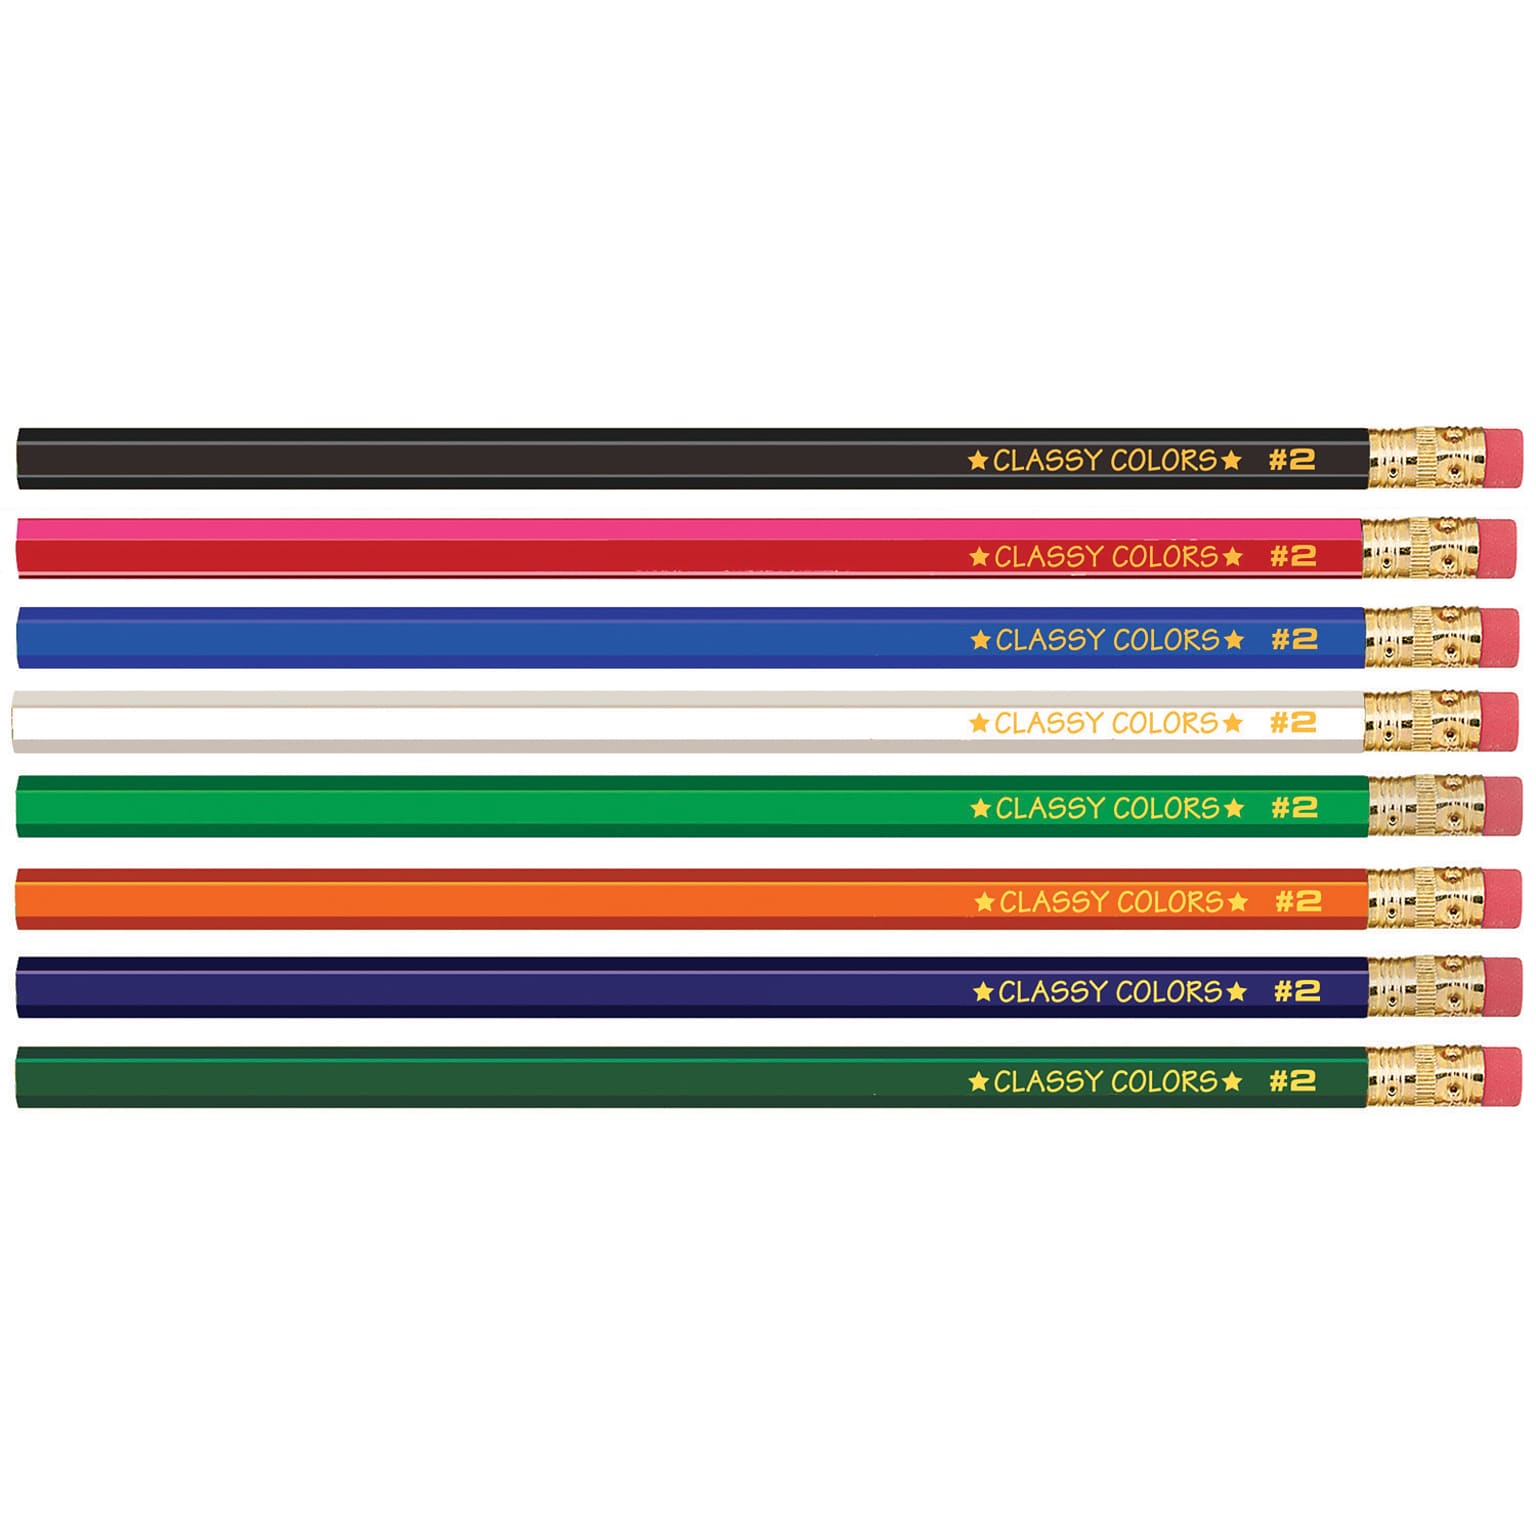 Musgrave Pencil Company Wood Case Hex Pencil, Assorted Colors, #2 Lead, 12/Pack, 12 Packs (MUSDHEX9912-12)